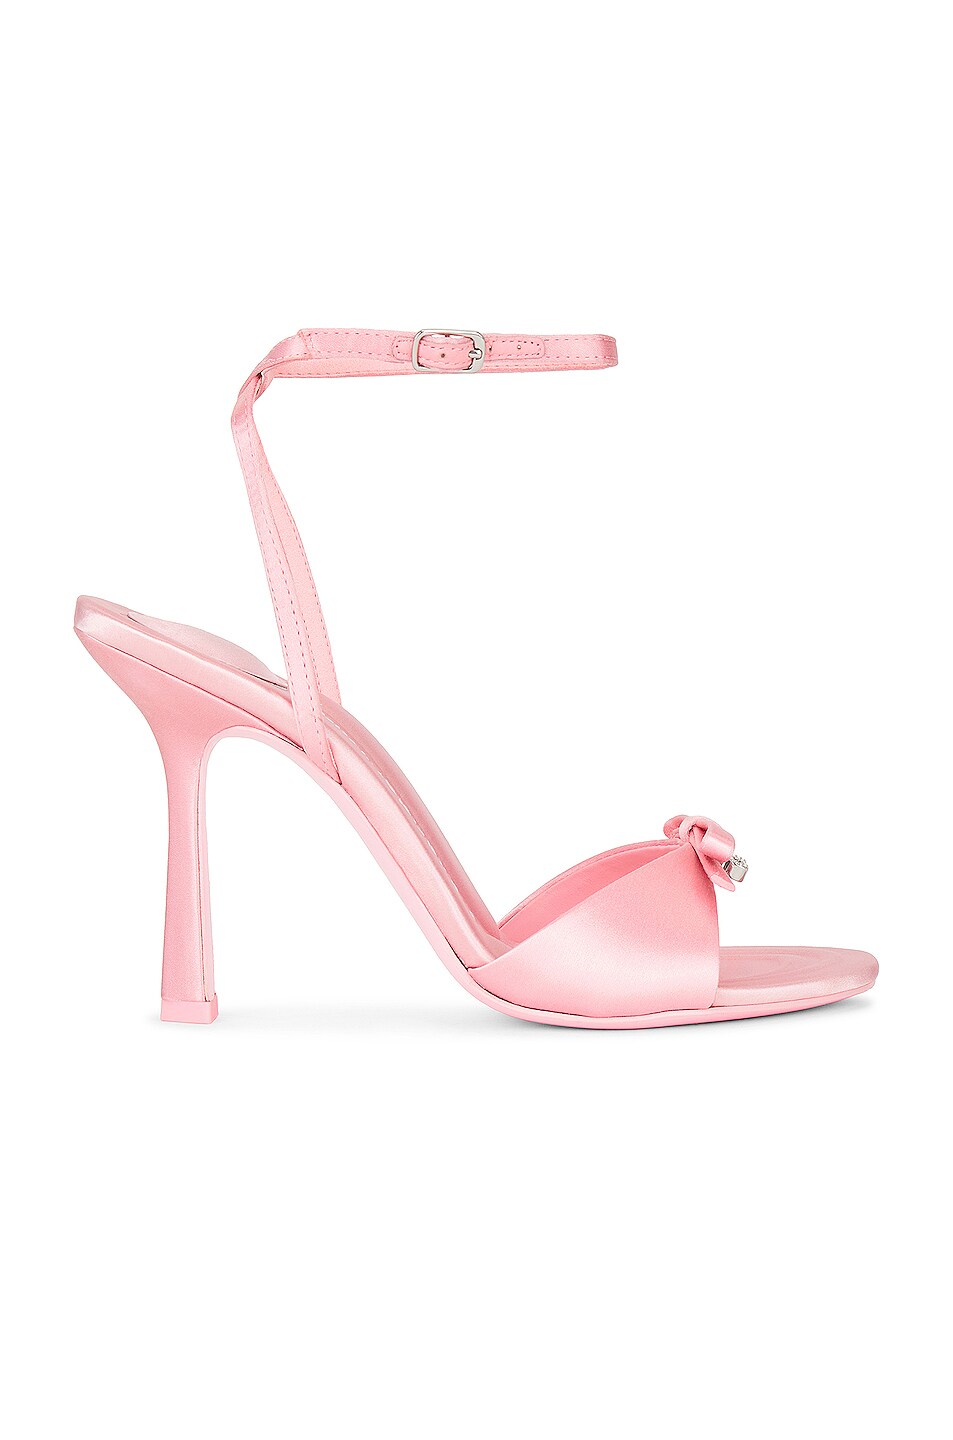 Image 1 of Alexander Wang Dahlia 105 Bow Sandal in Prism Pink